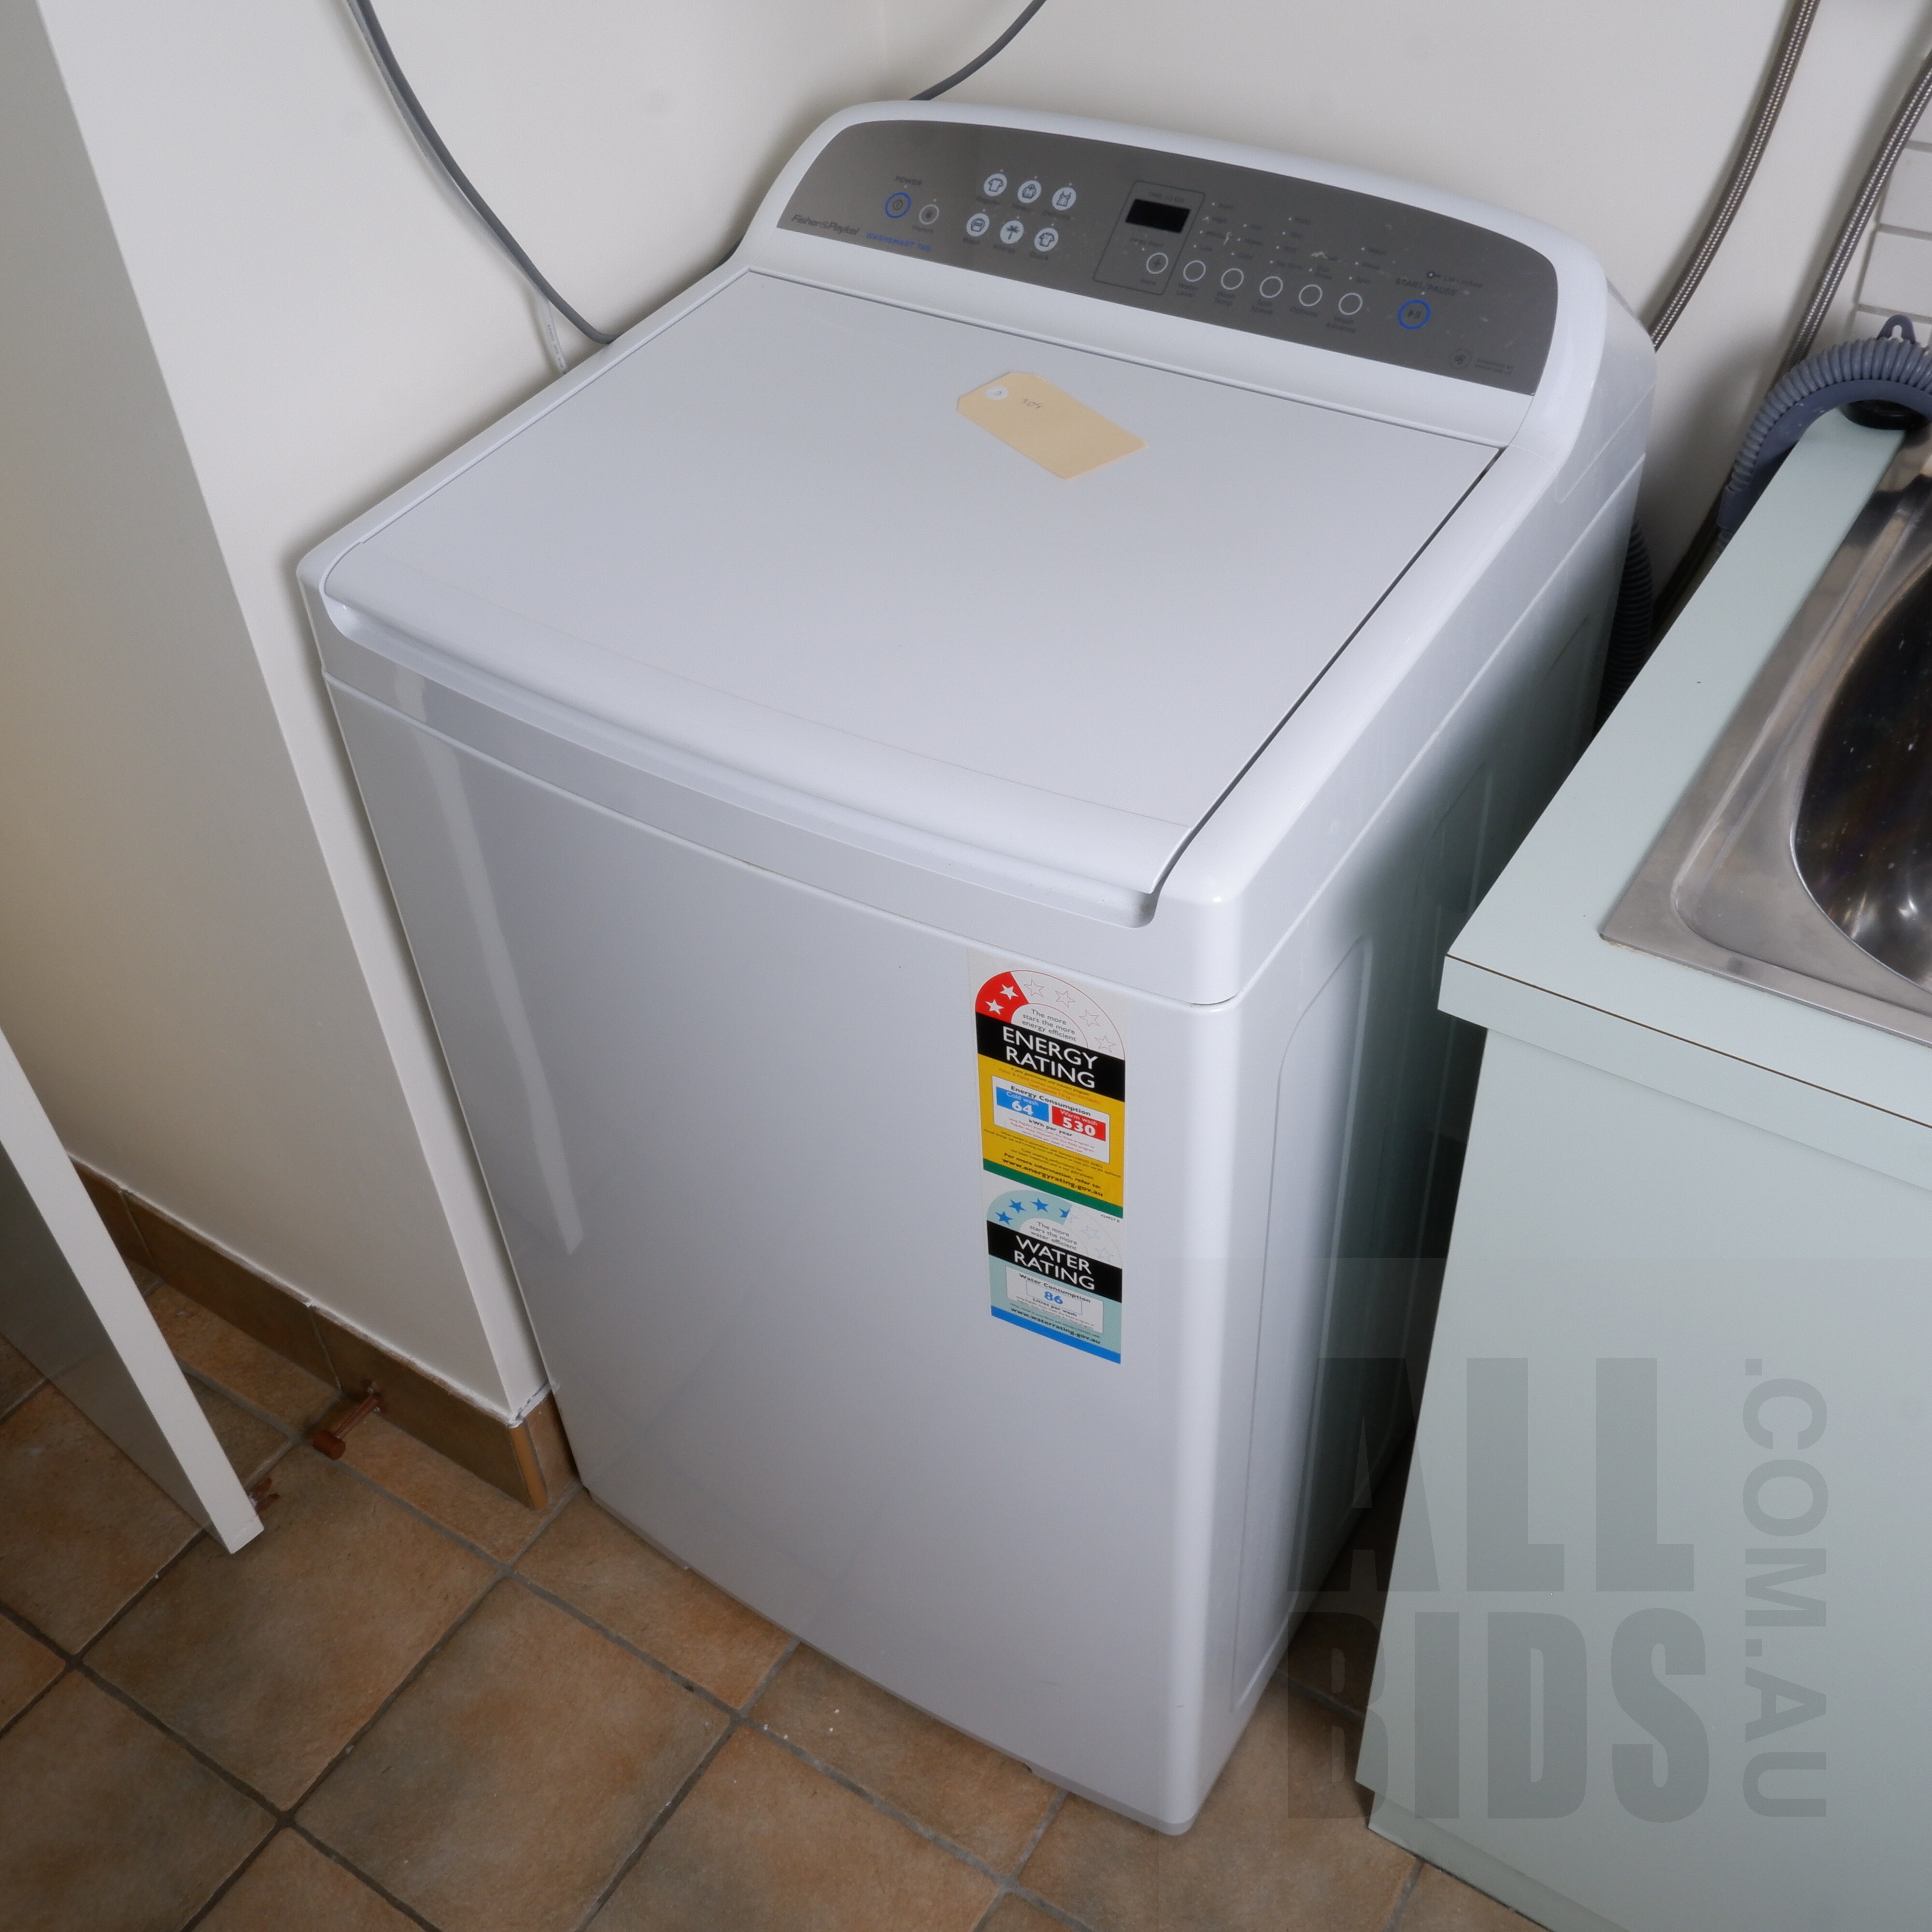 'Fisher and Paykel Smart Wash 7kg'